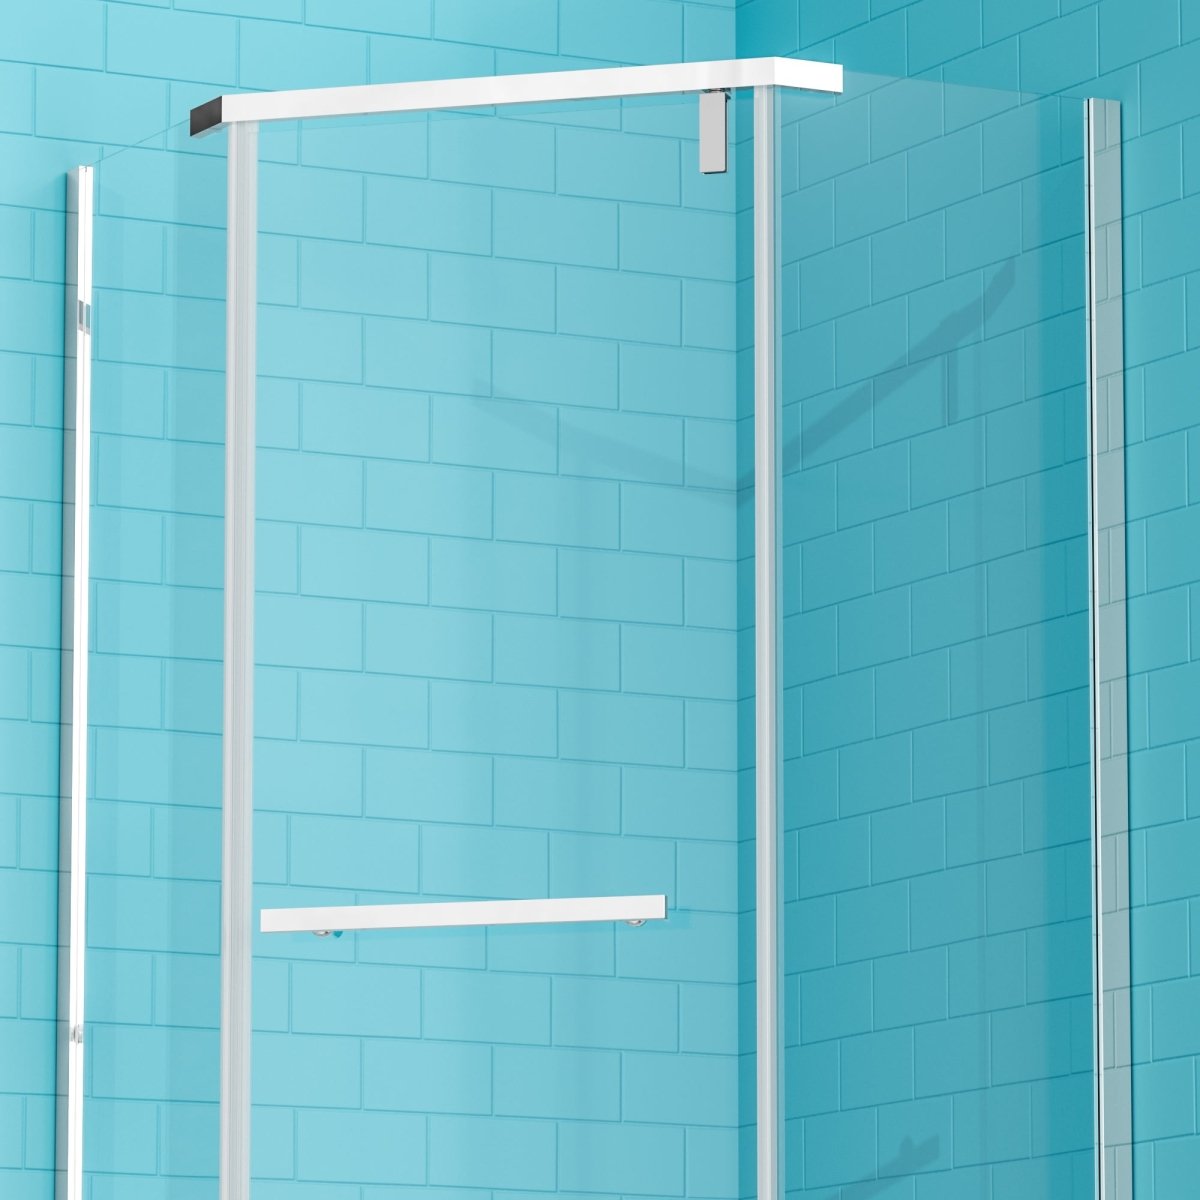 Prism Neo-Angle Frameless Shower Door 36 in. W x 72 in. H,Corner Shower Enclosure,6mm Clear Glass,Pivot Shower Doors,Chrome,Not Base